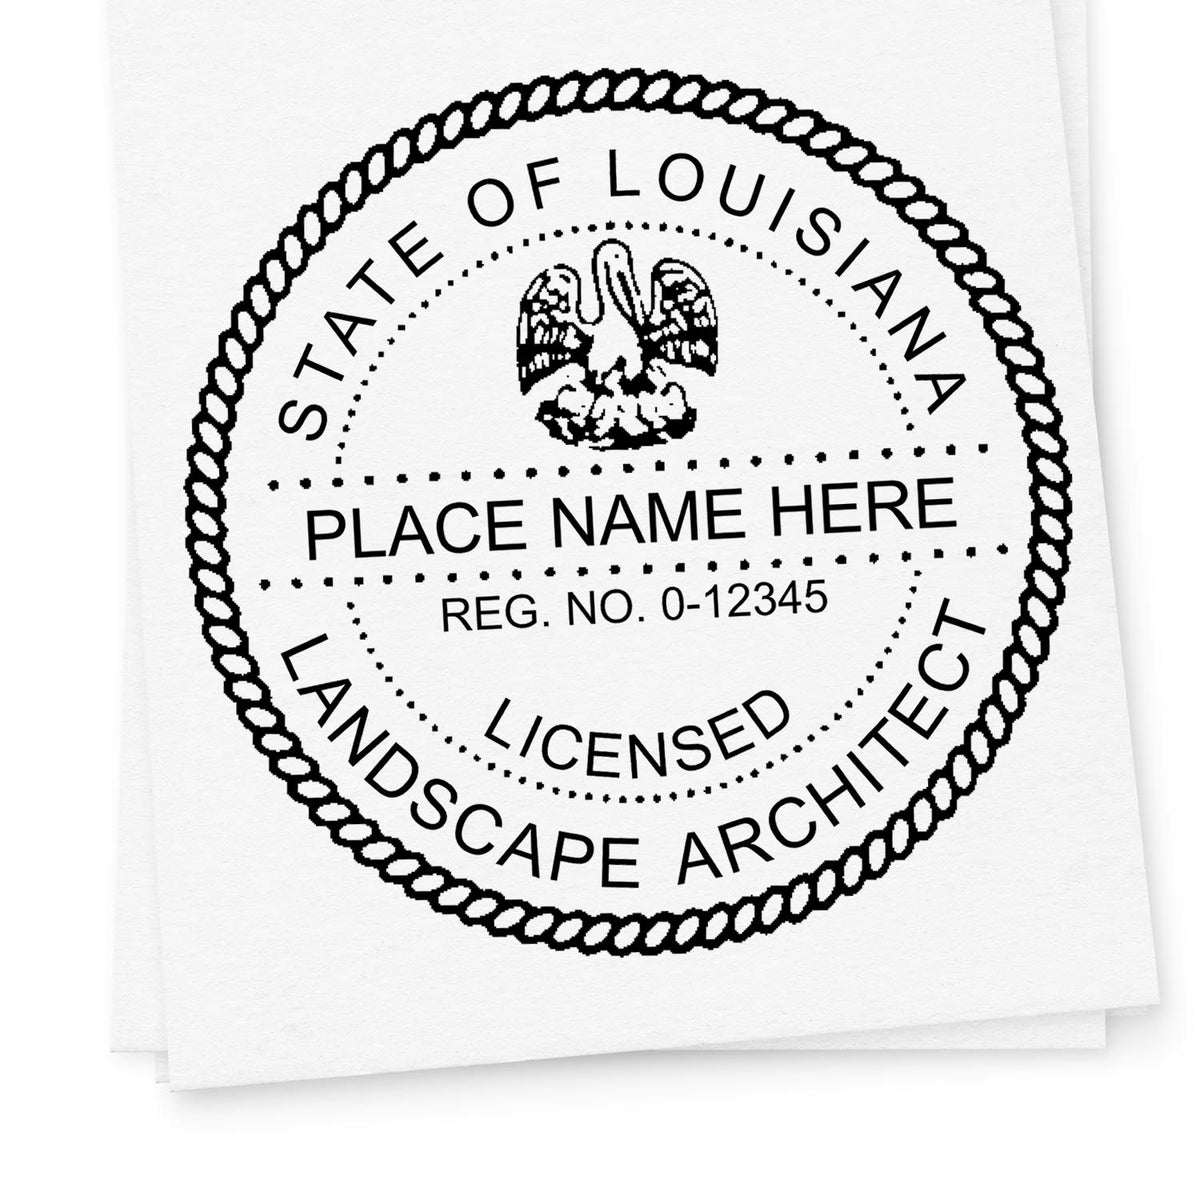 A stamped impression of the Self-Inking Louisiana Landscape Architect Stamp in this stylish lifestyle photo, setting the tone for a unique and personalized product.